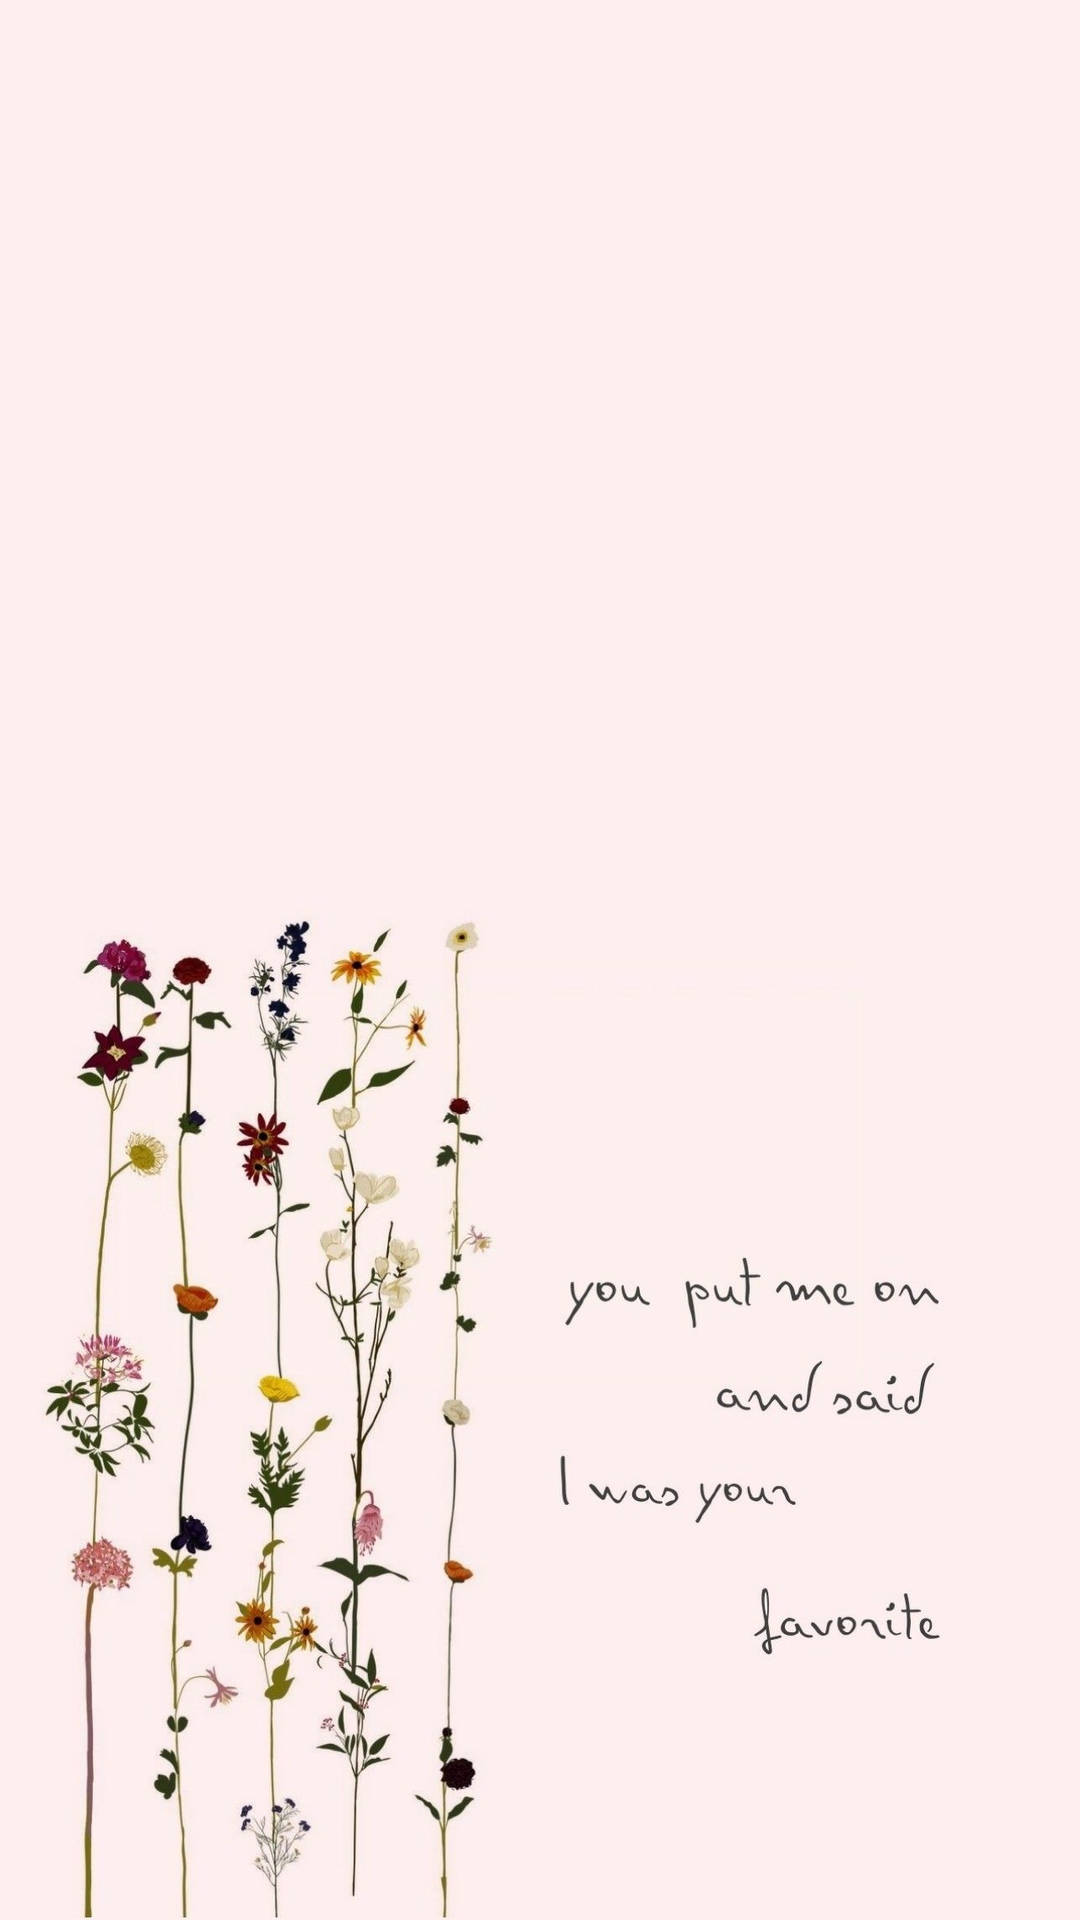 Download Small Quotes From Taylor Swift Songs Wallpaper | Wallpapers.com